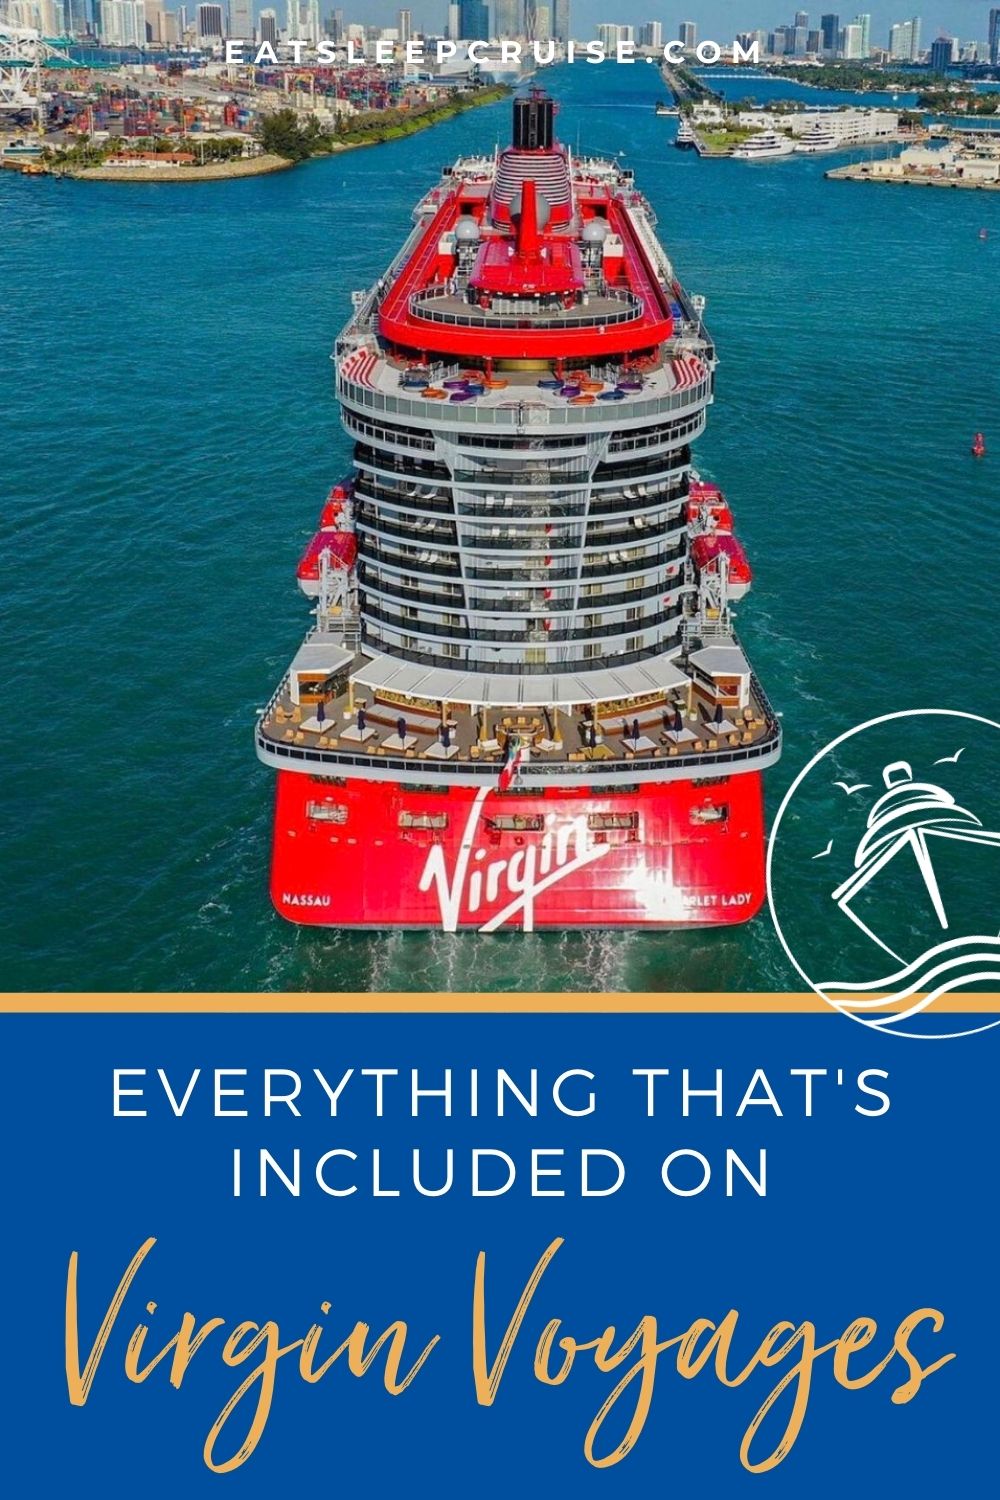 What's Included on Virgin Voyages (and What's Not)